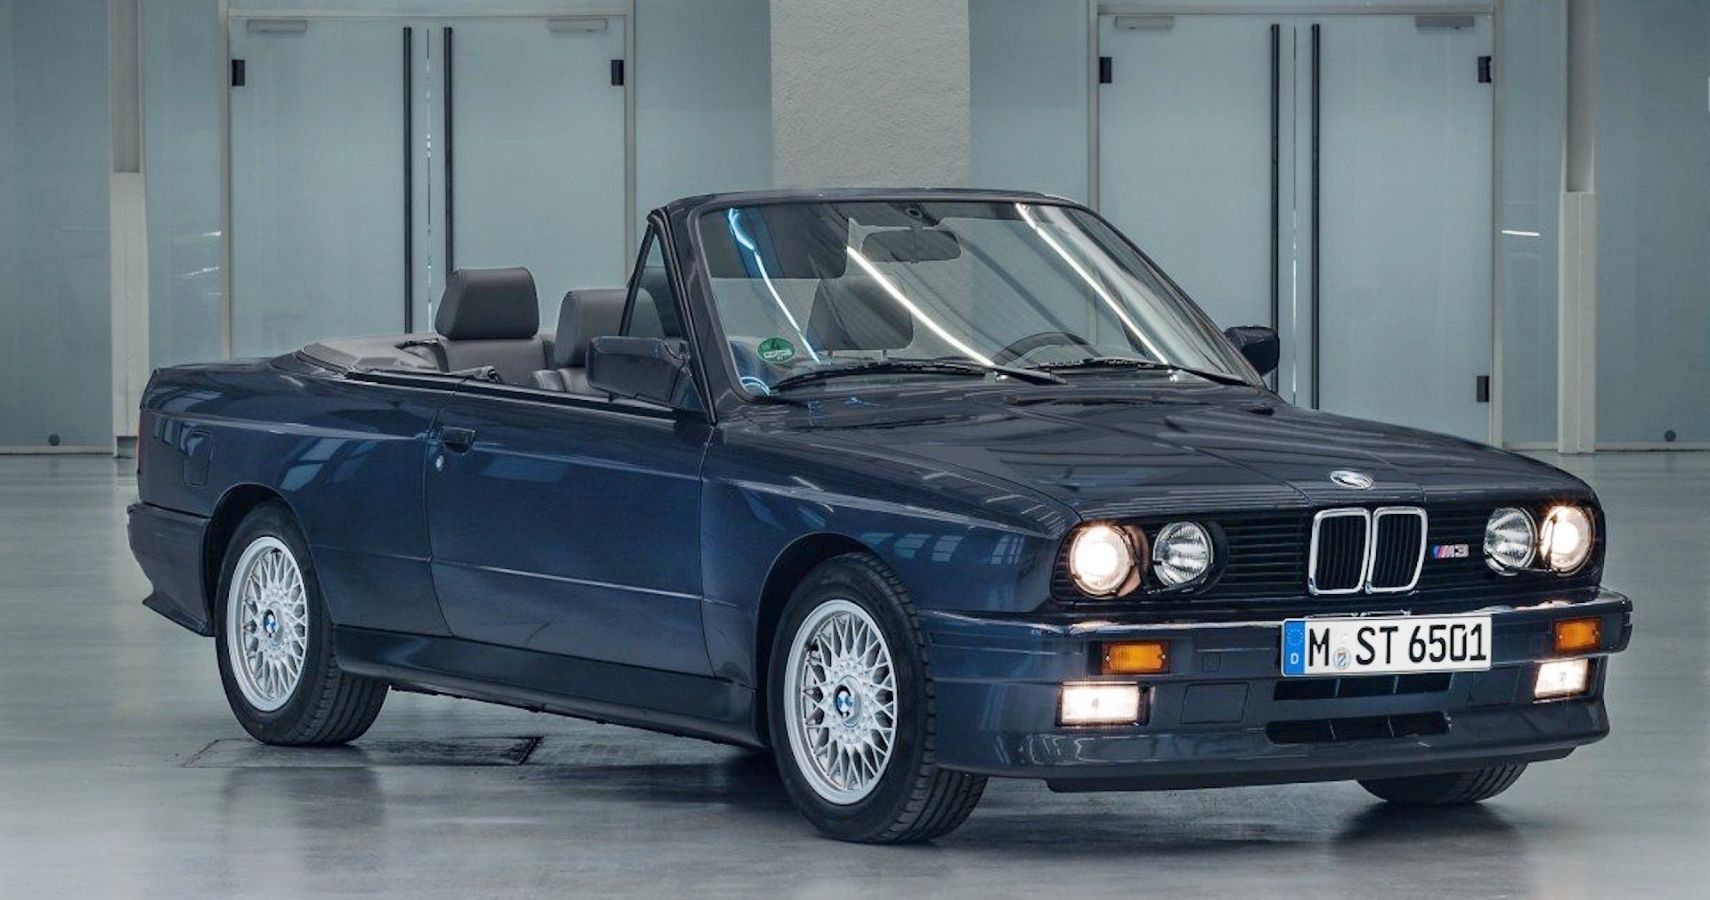 Blue 1988 BMW M3 E30 Convertible Was A First From M Division